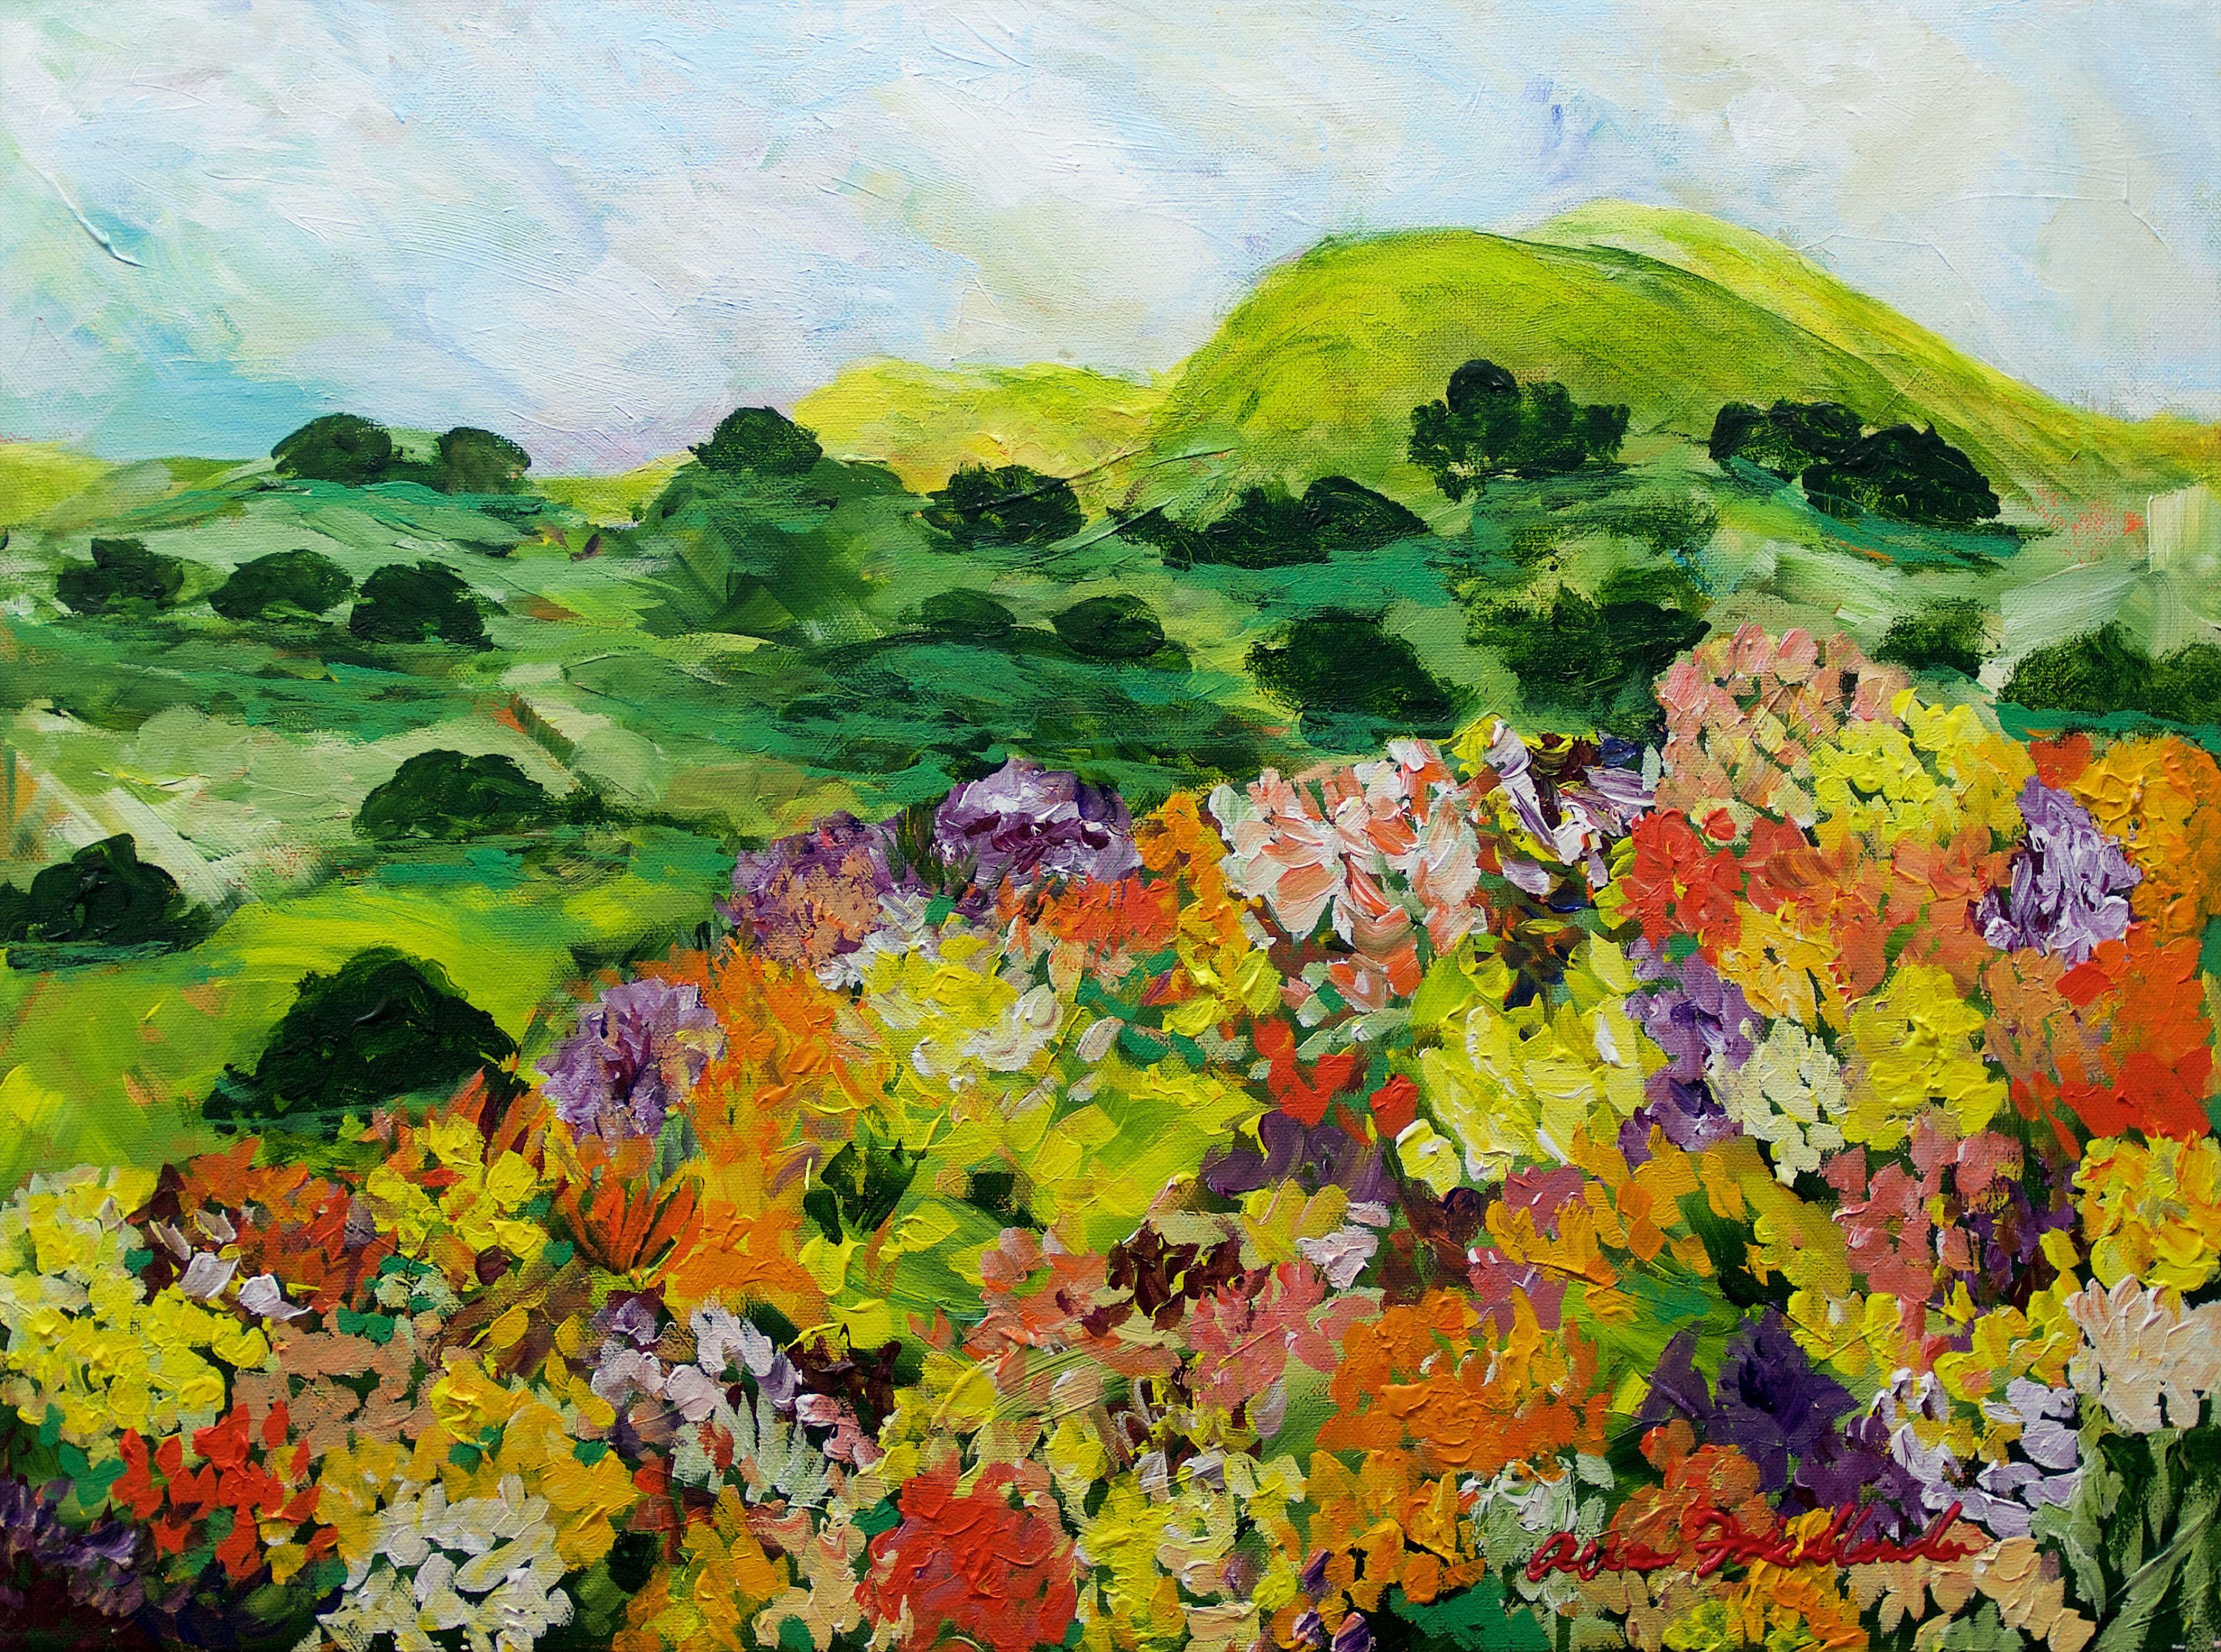 This painting is from the area north of where I live. I am excited by the beauty of the hills and flowers. of Napa, California. It is done on canvas. The edges are painted and the painting is varnished and ready to hang. It is varnished to protect